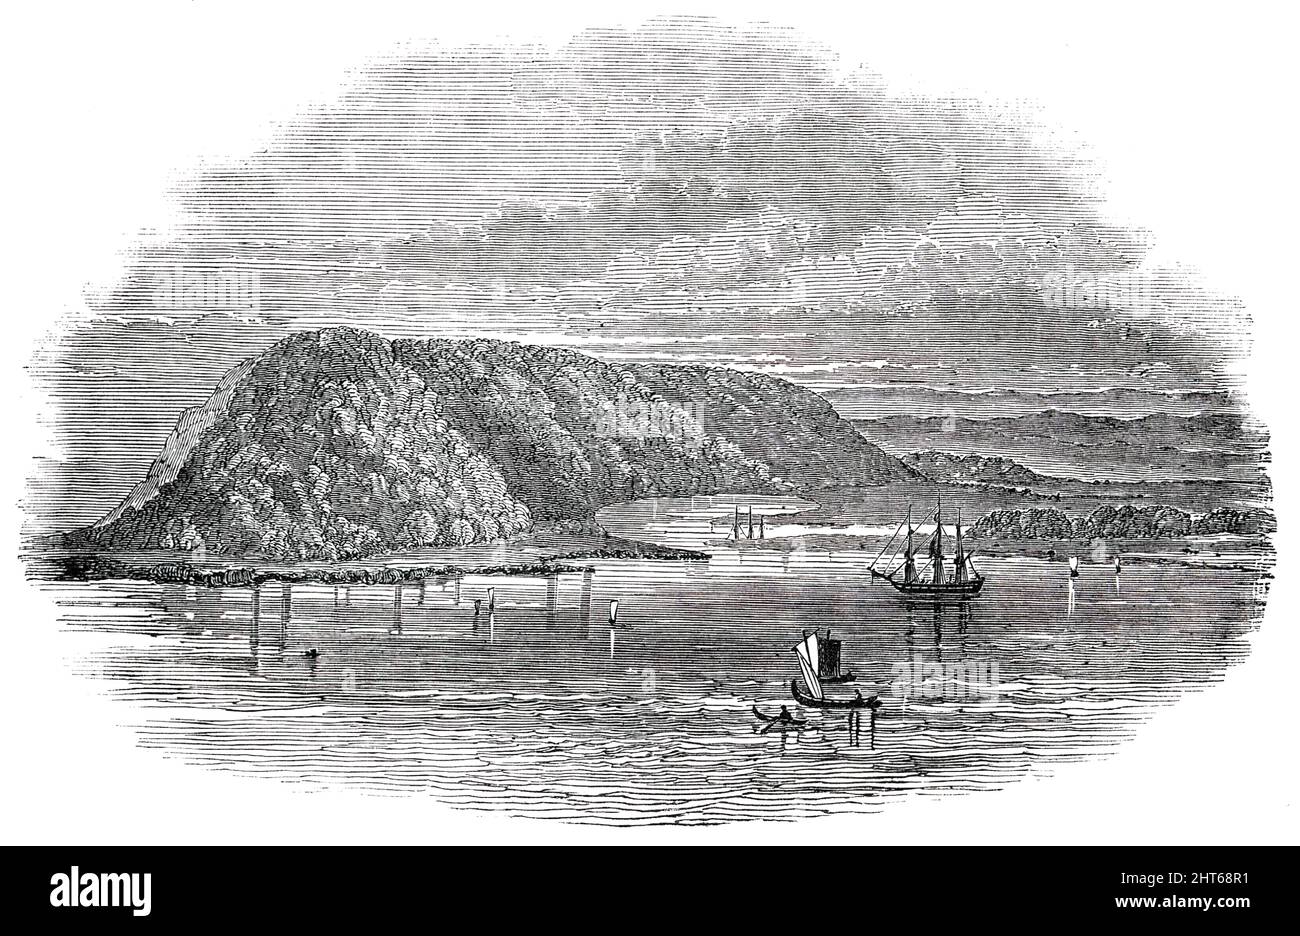 Natal, now D'Urban - The Bluff, 1850. View of '...Port Natal, now called D' Urban, in honour of Sir Benjamin D'Urban....its superabundance of fuel as  well as large timber, its inexhaustible supply of